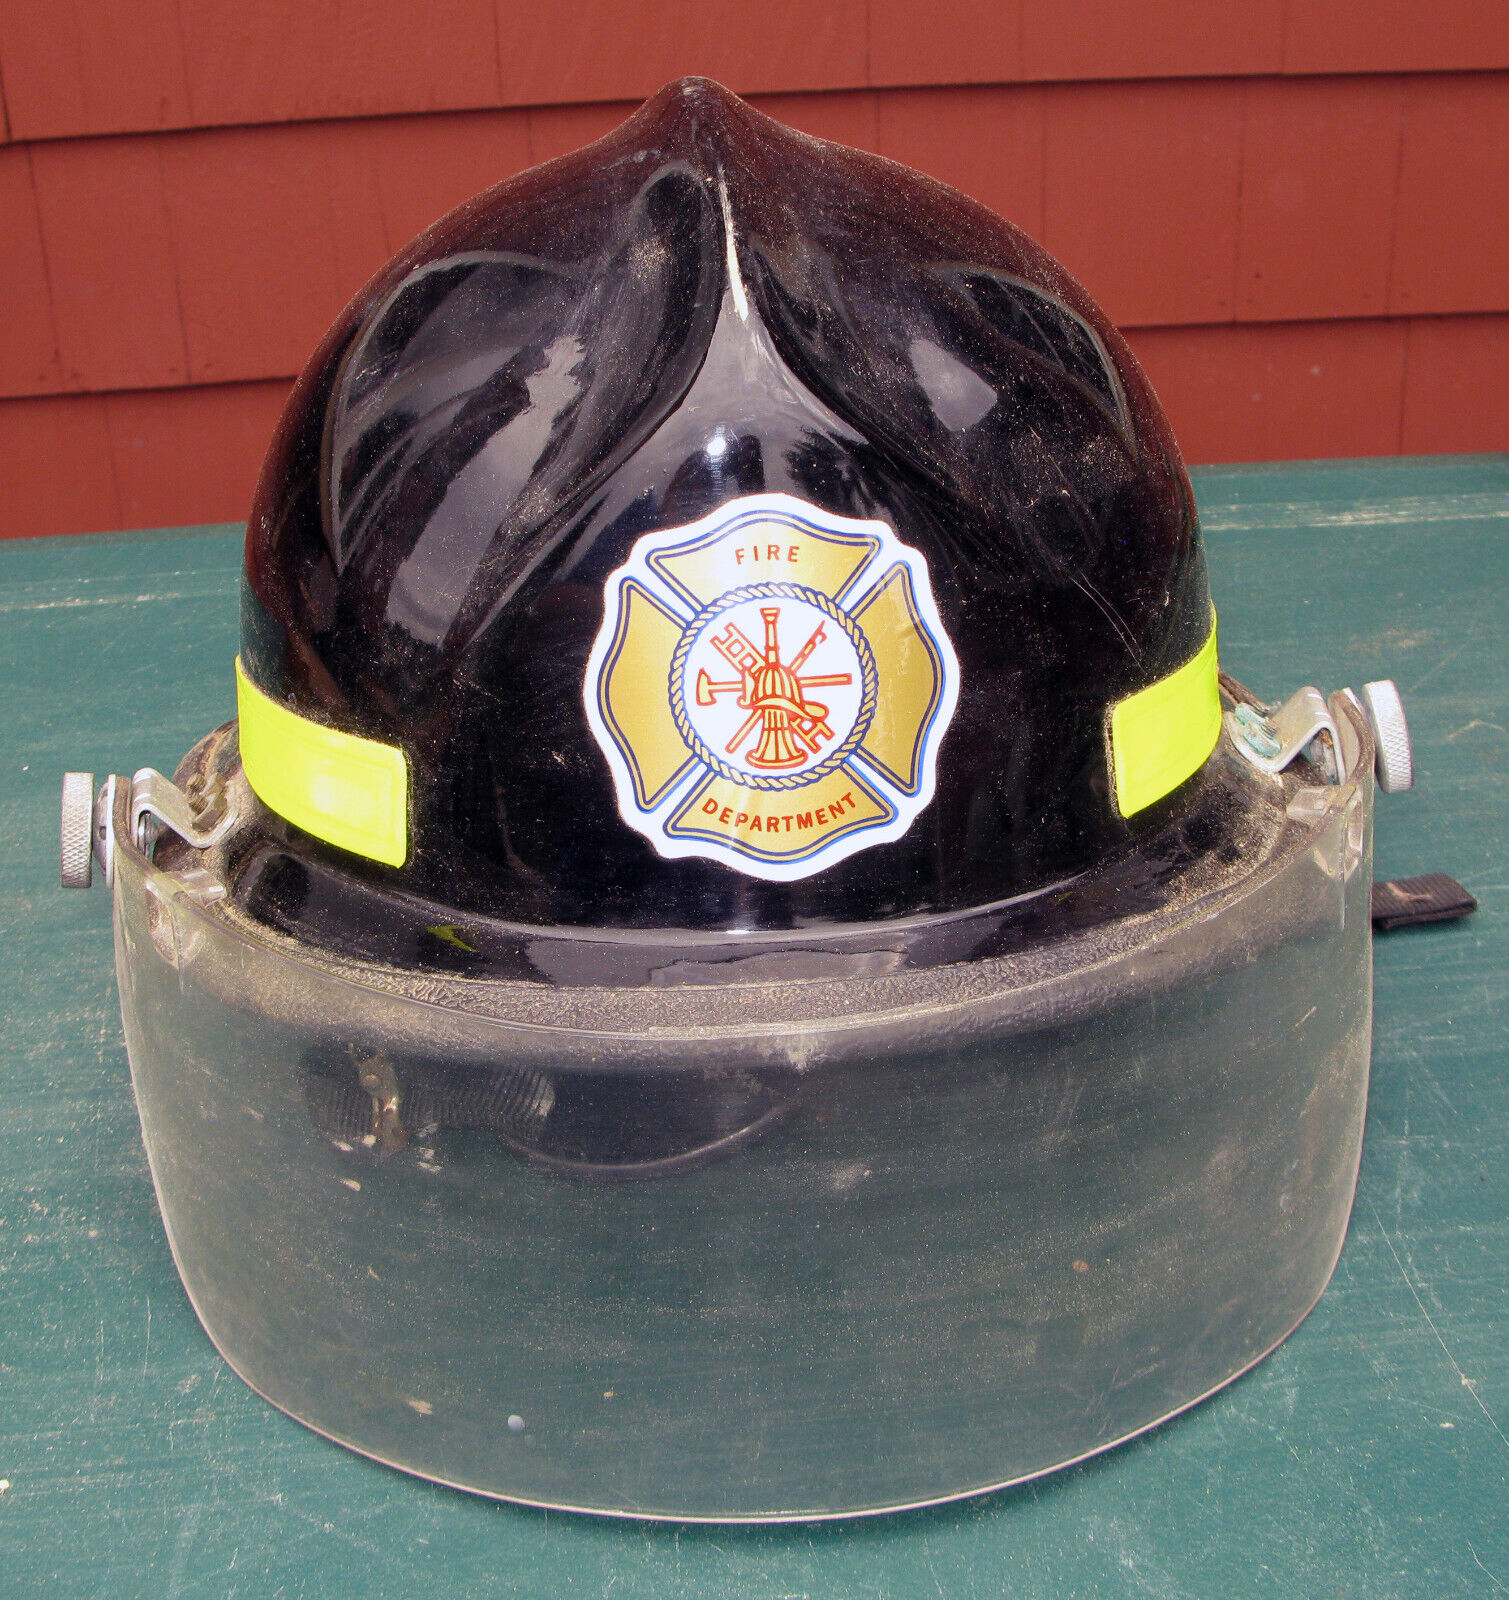 VINTAGE CAIRNS FIREMAN FIREFIGHTER USED HELMET WITH FACE SHIELD BLACK WITH DECAL